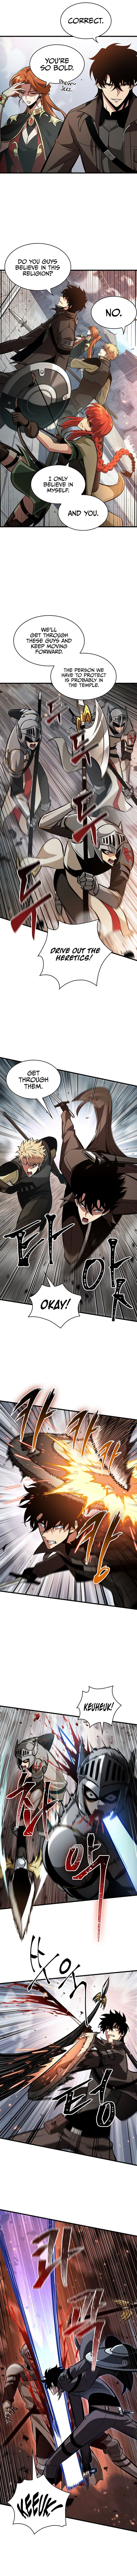 Pick Me Up Chapter 47 page 9